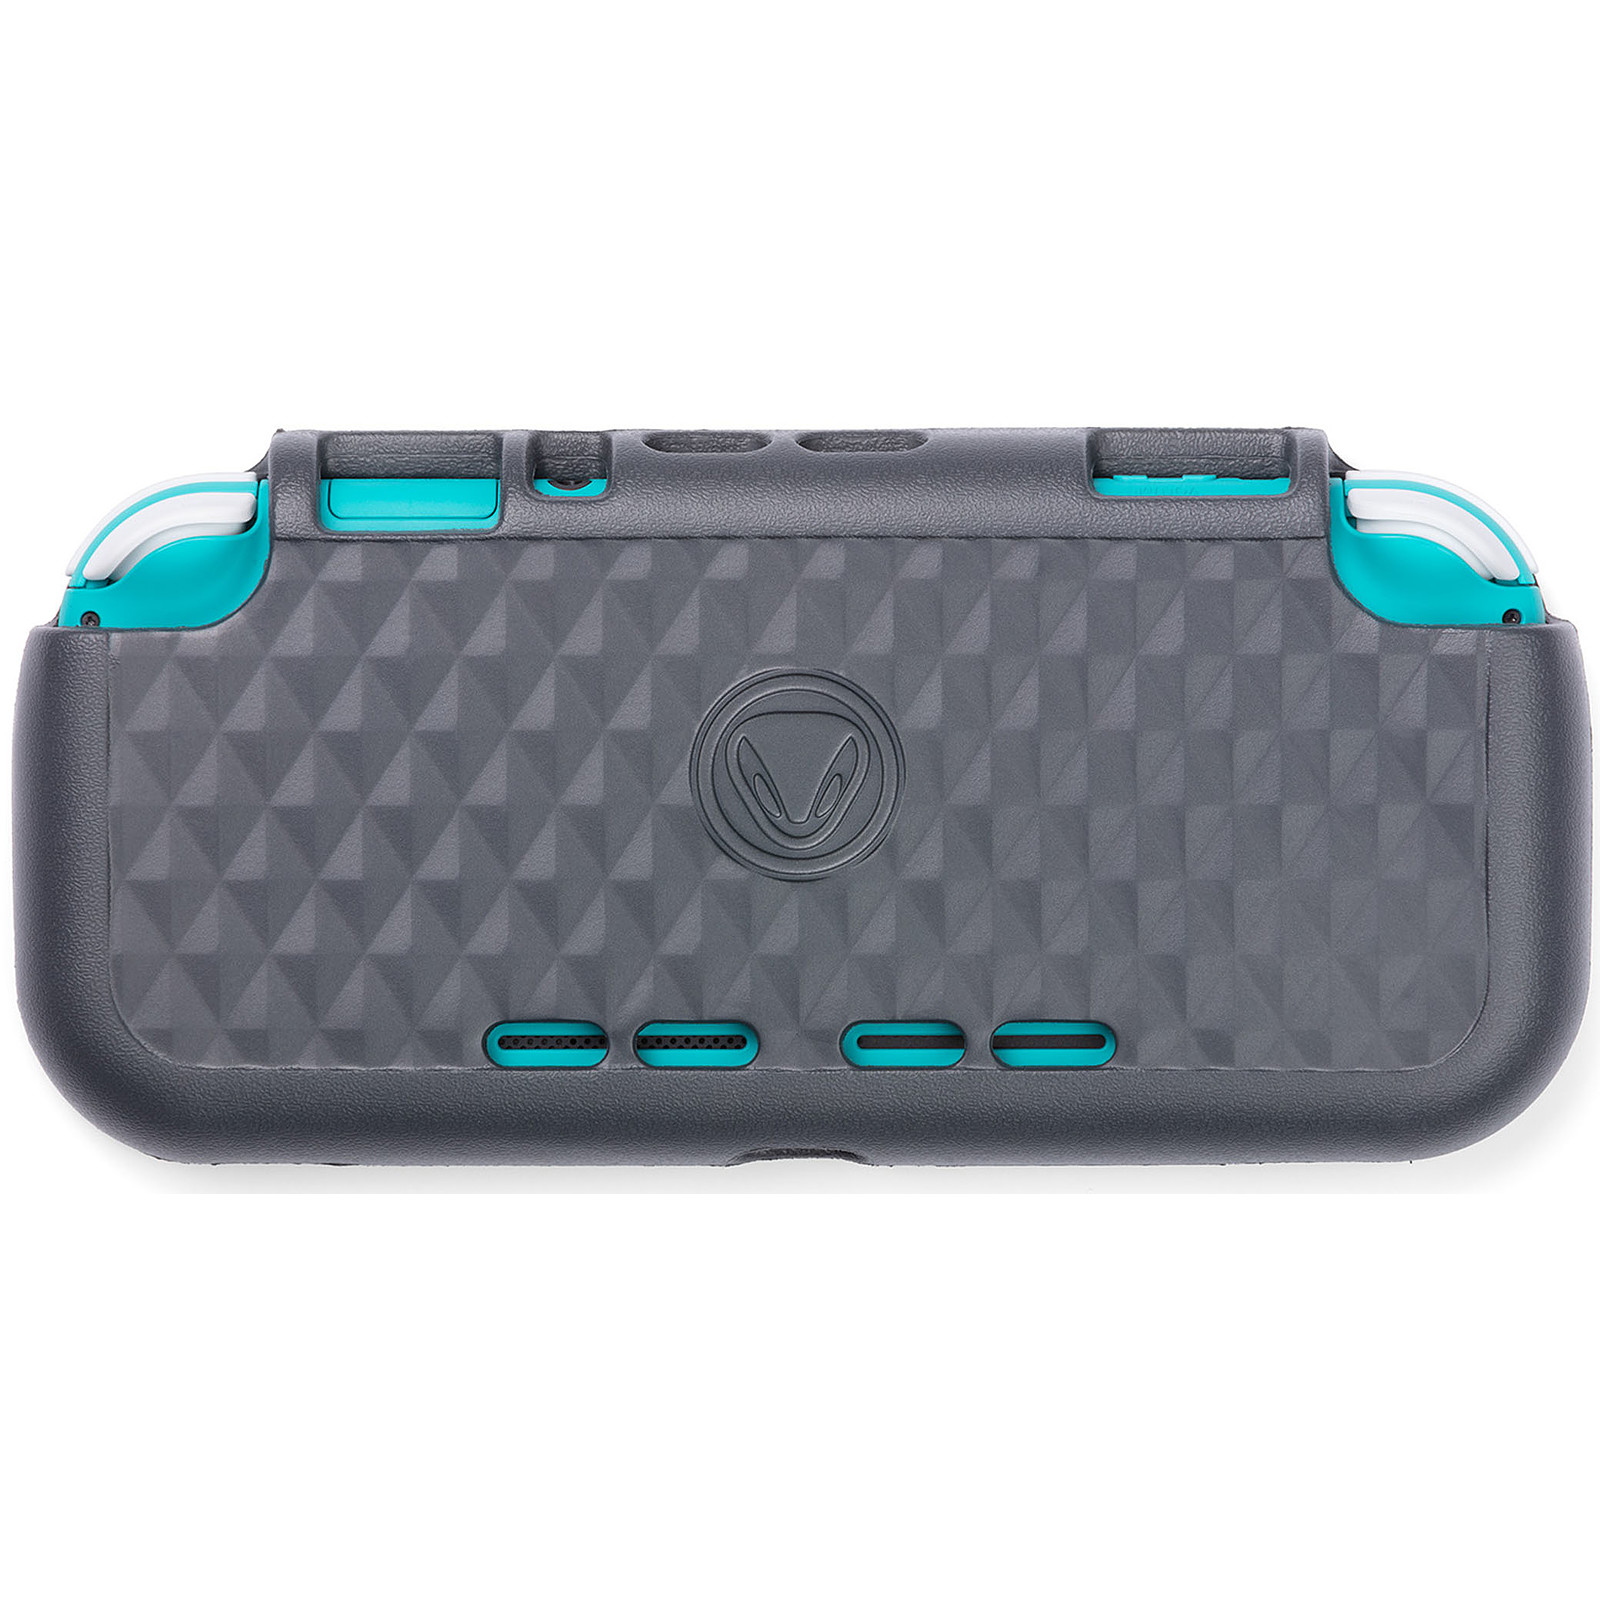 snakebyte - Coque Gaming Bumper pour Nintendo Switch Lite - Accessoires Switch Snakebyte